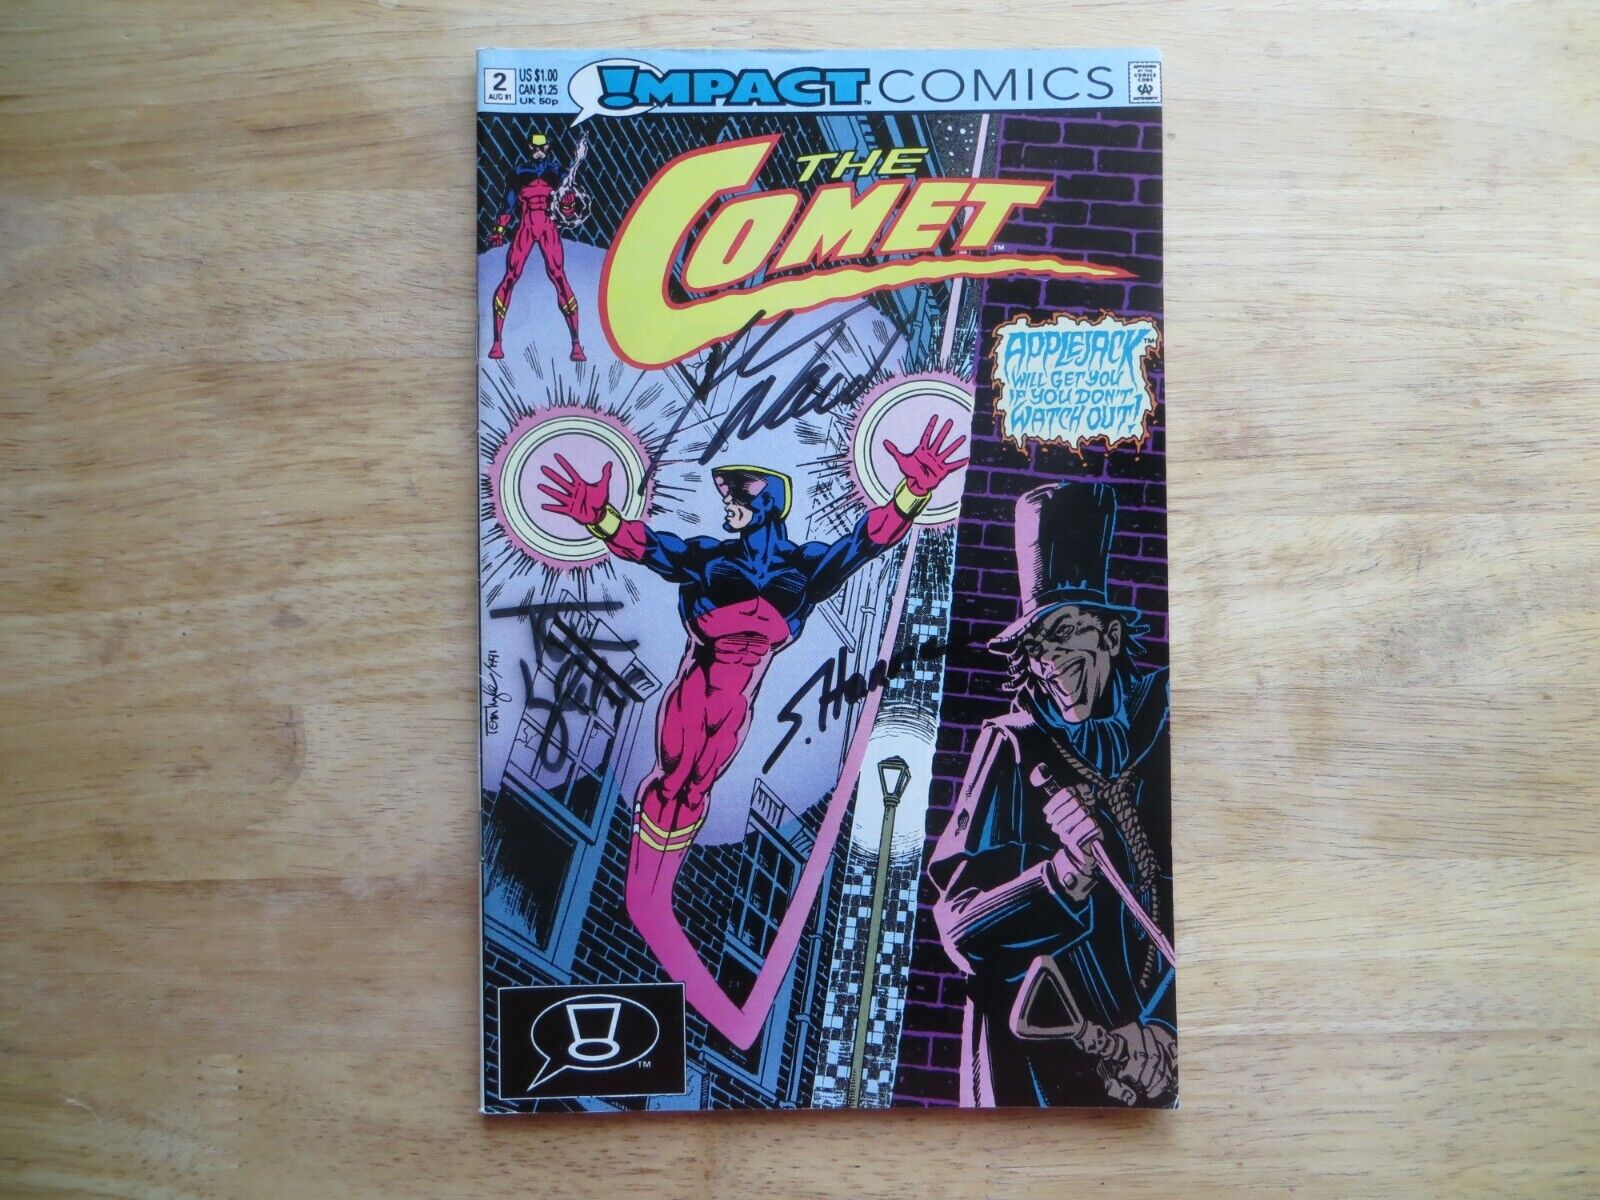 1991 DC THE COMET # 2 SIGNED 3X SCOTT HANNA & TOM LYLE & MARK WAID,WITH POA